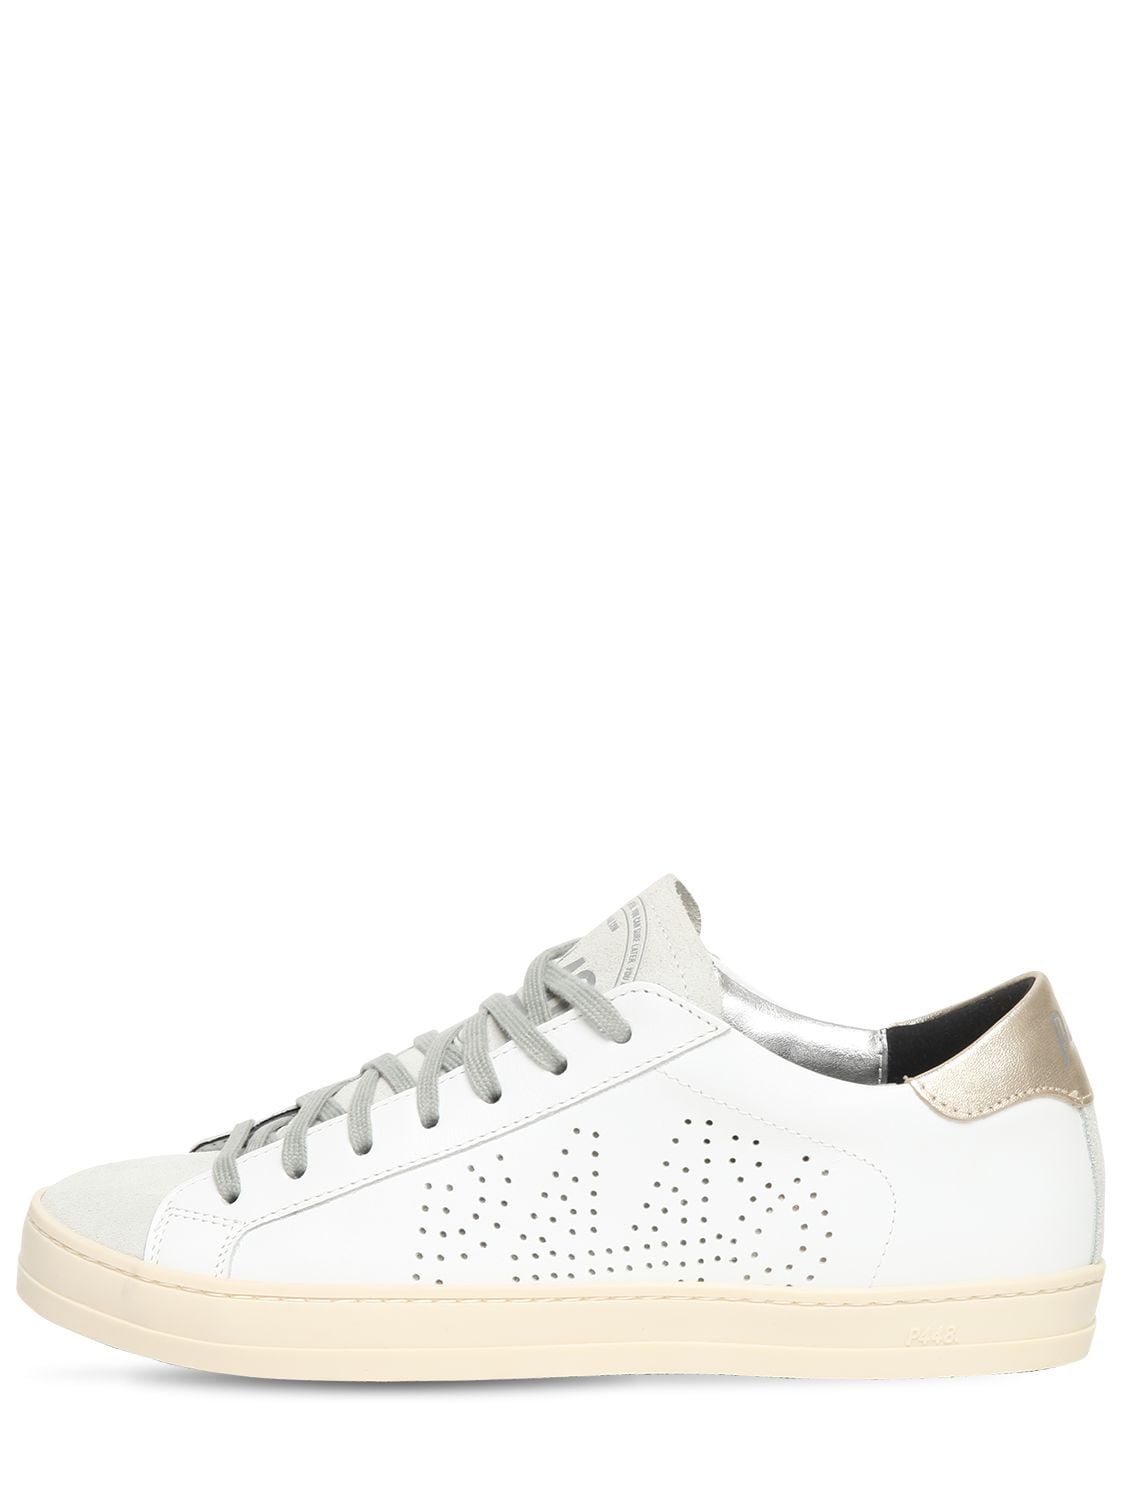 P448 20MM JOHN LEATHER & SUEDE SNEAKERS,72IMUH001-V0HJL1BMQQ2